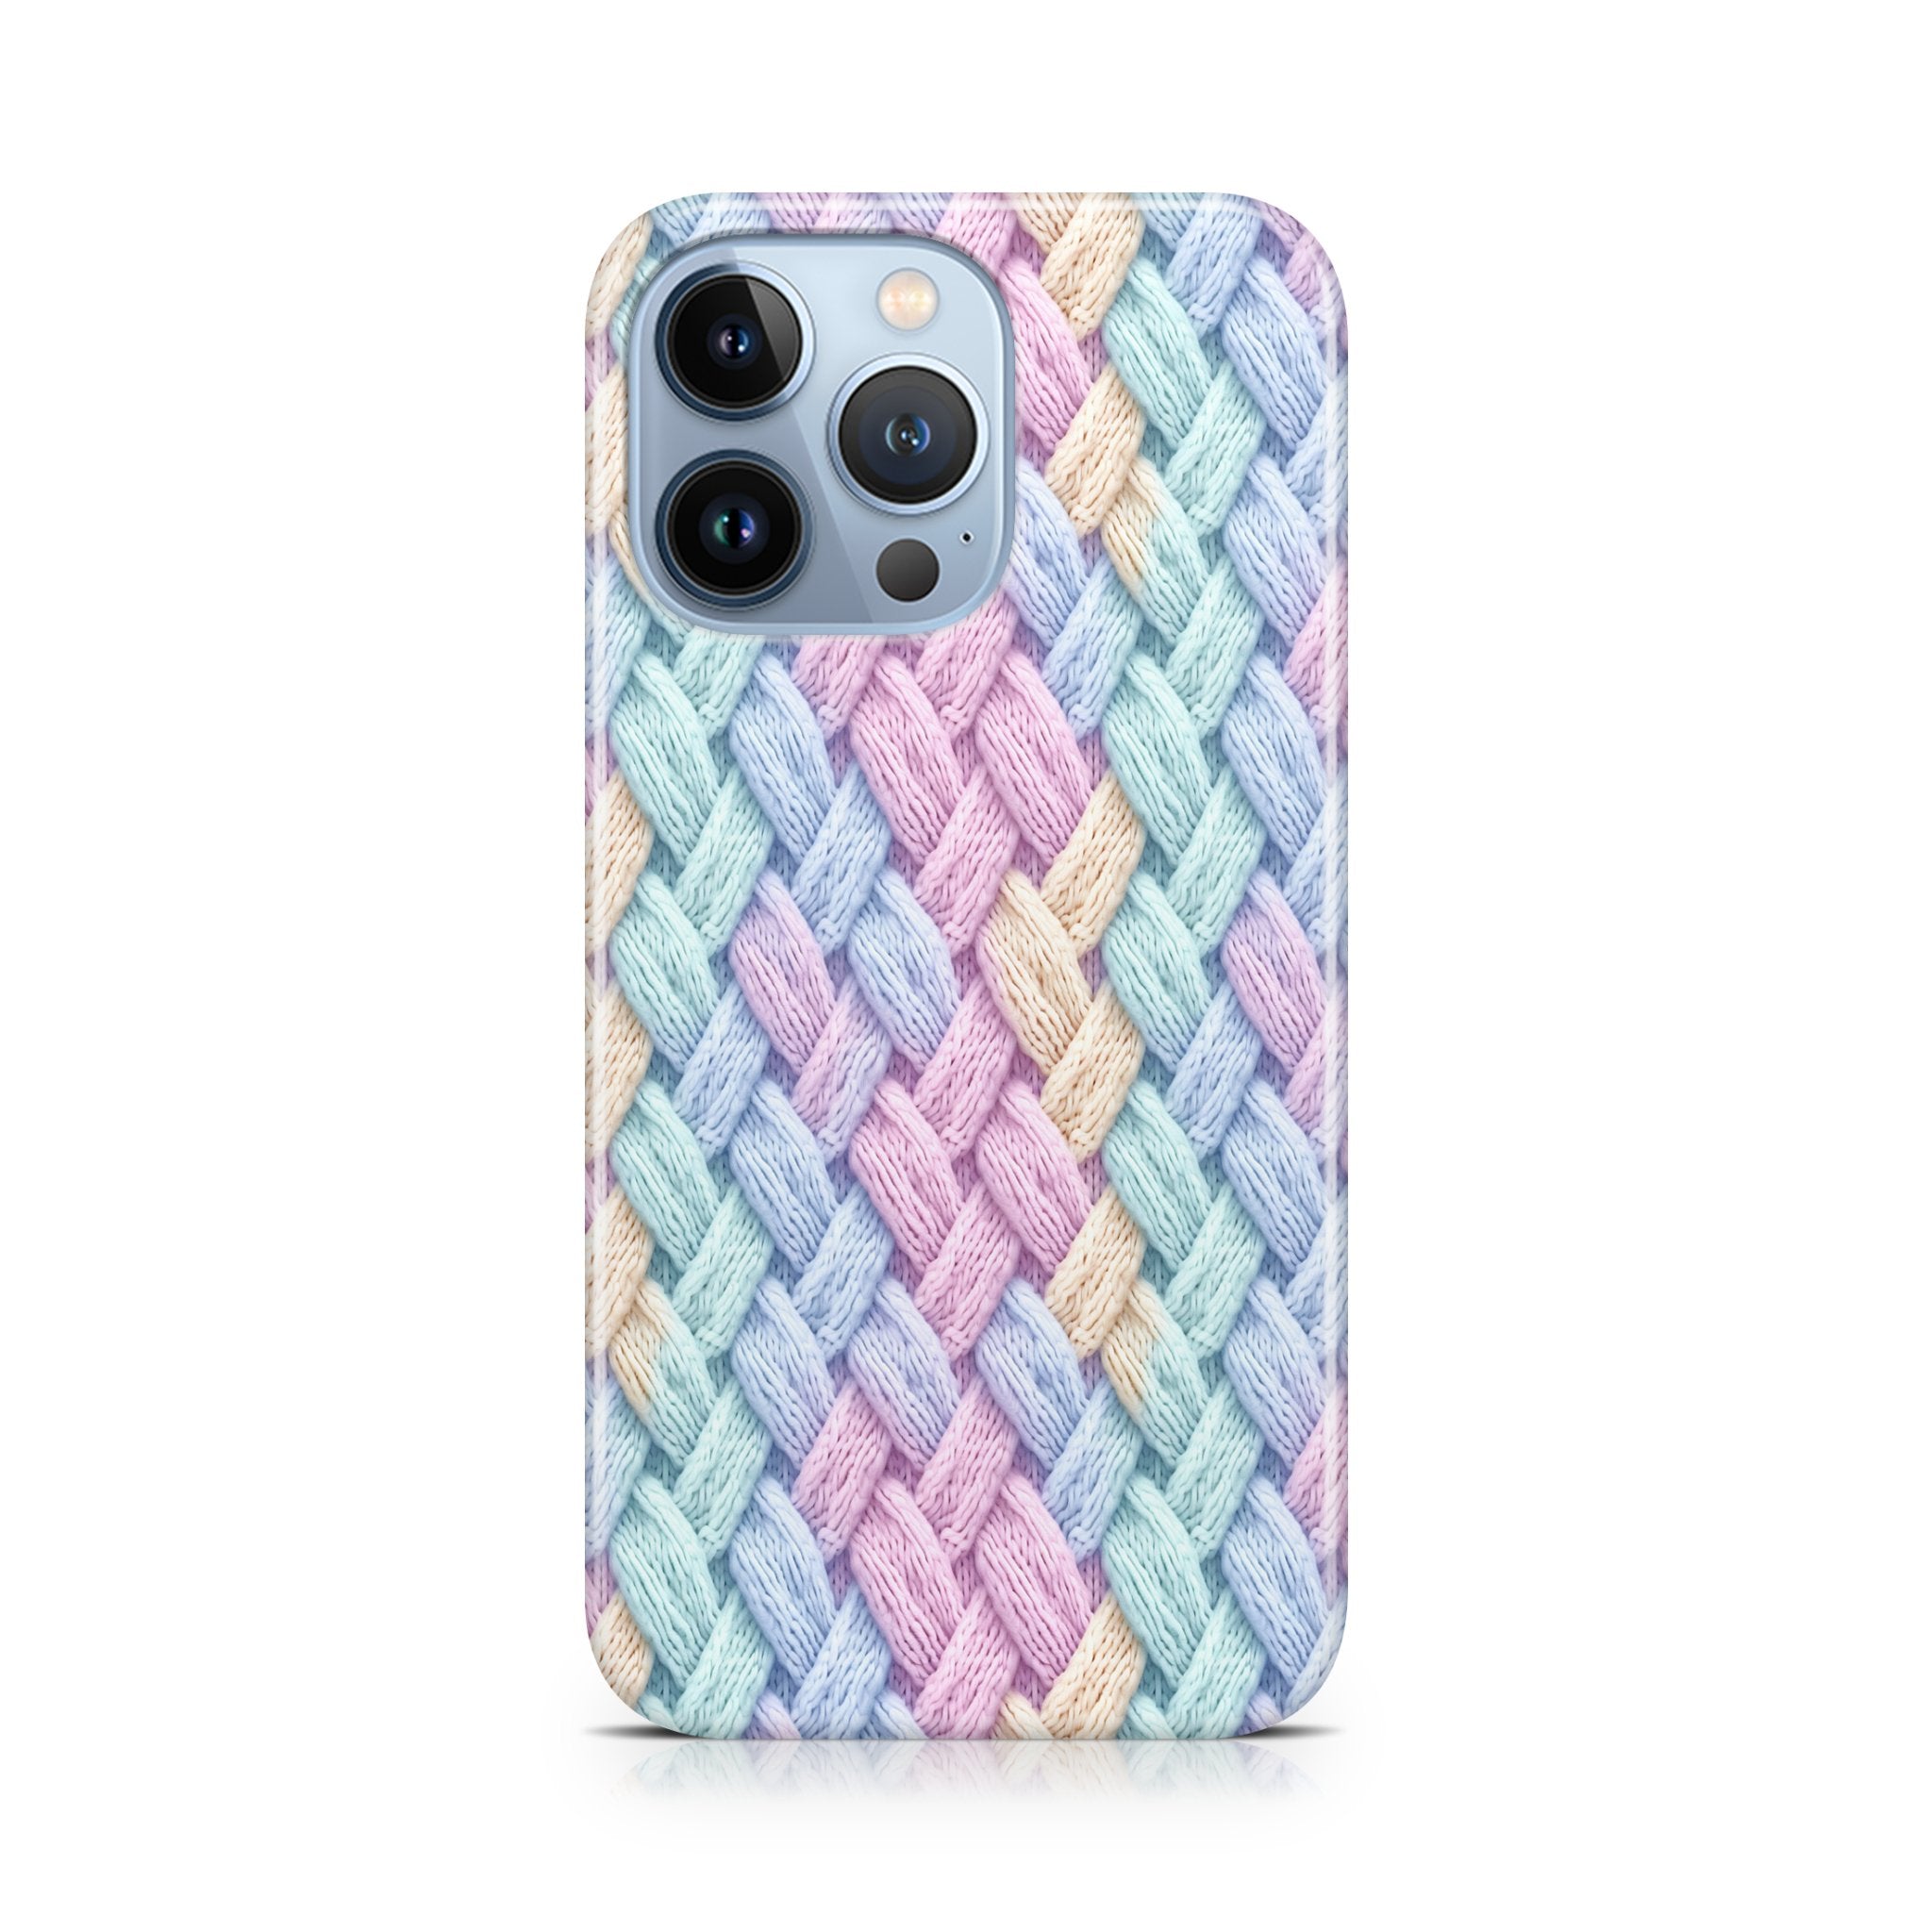 Whimsical Threads - iPhone phone case designs by CaseSwagger